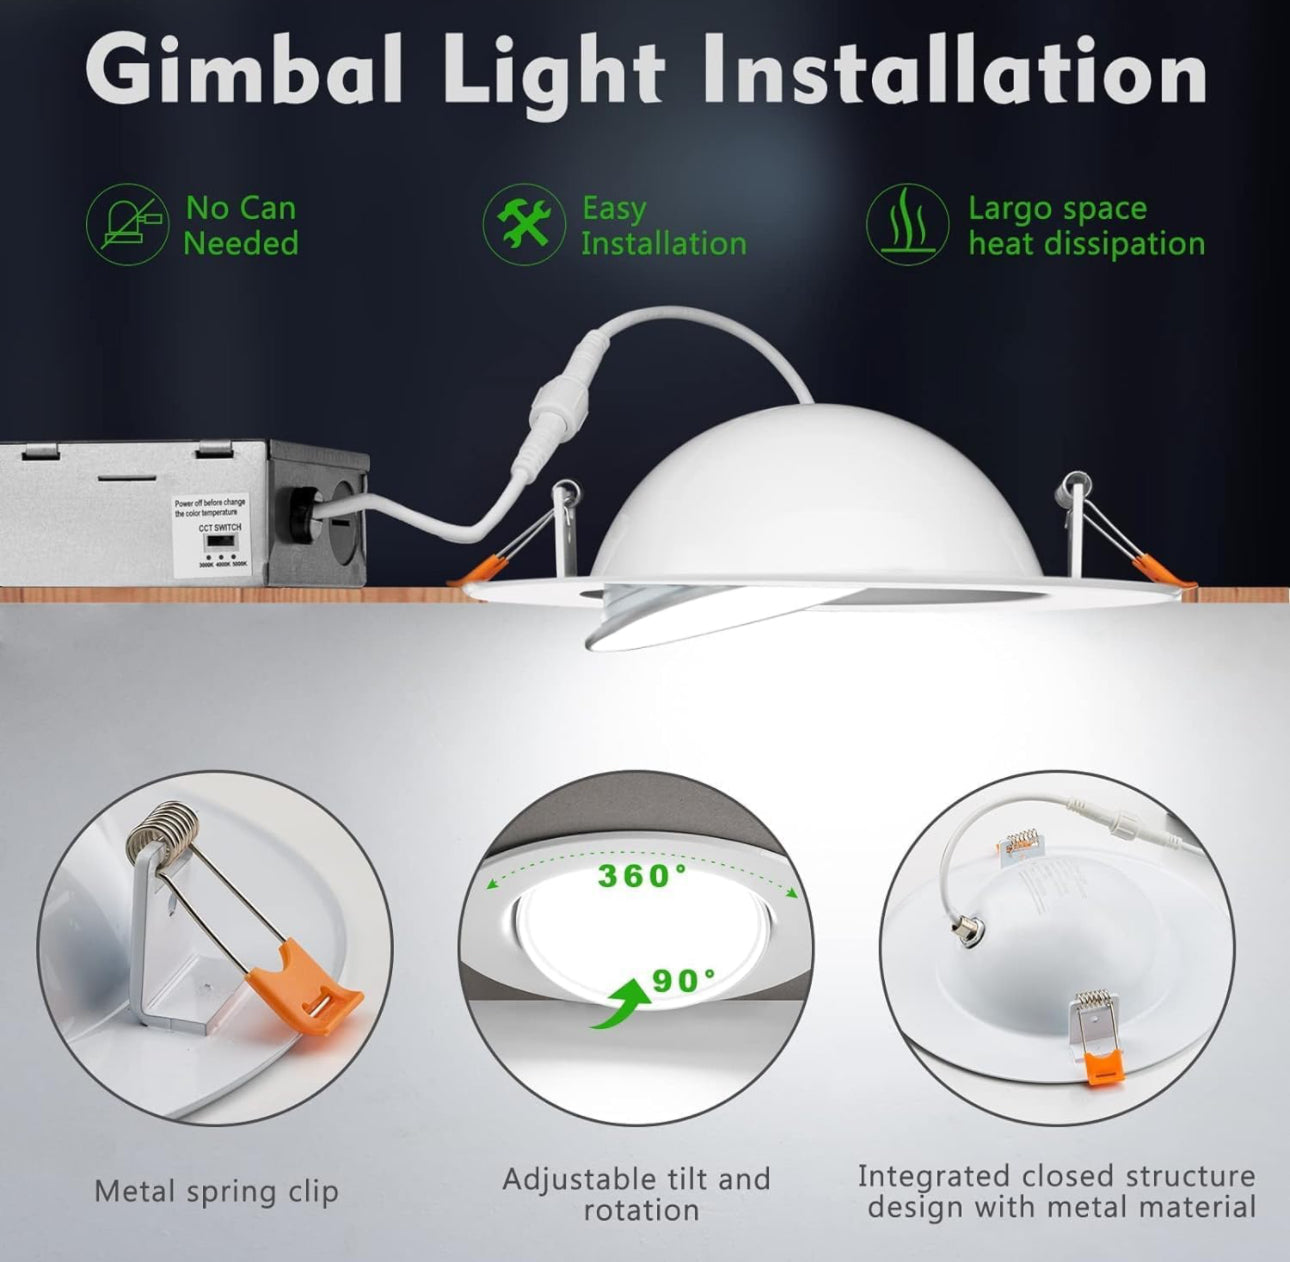 bulbeats 24Pack 𝗠𝗲𝘁𝗮𝗹 LED Recessed Light with Gimbal 5/6 Inch, CRI90140lm/w (high efficency ) LED Downlight, IC Rated LED Recessed Lighting Fixture 3000K|4000K|5000K Dimmable LED Can Lights ETL